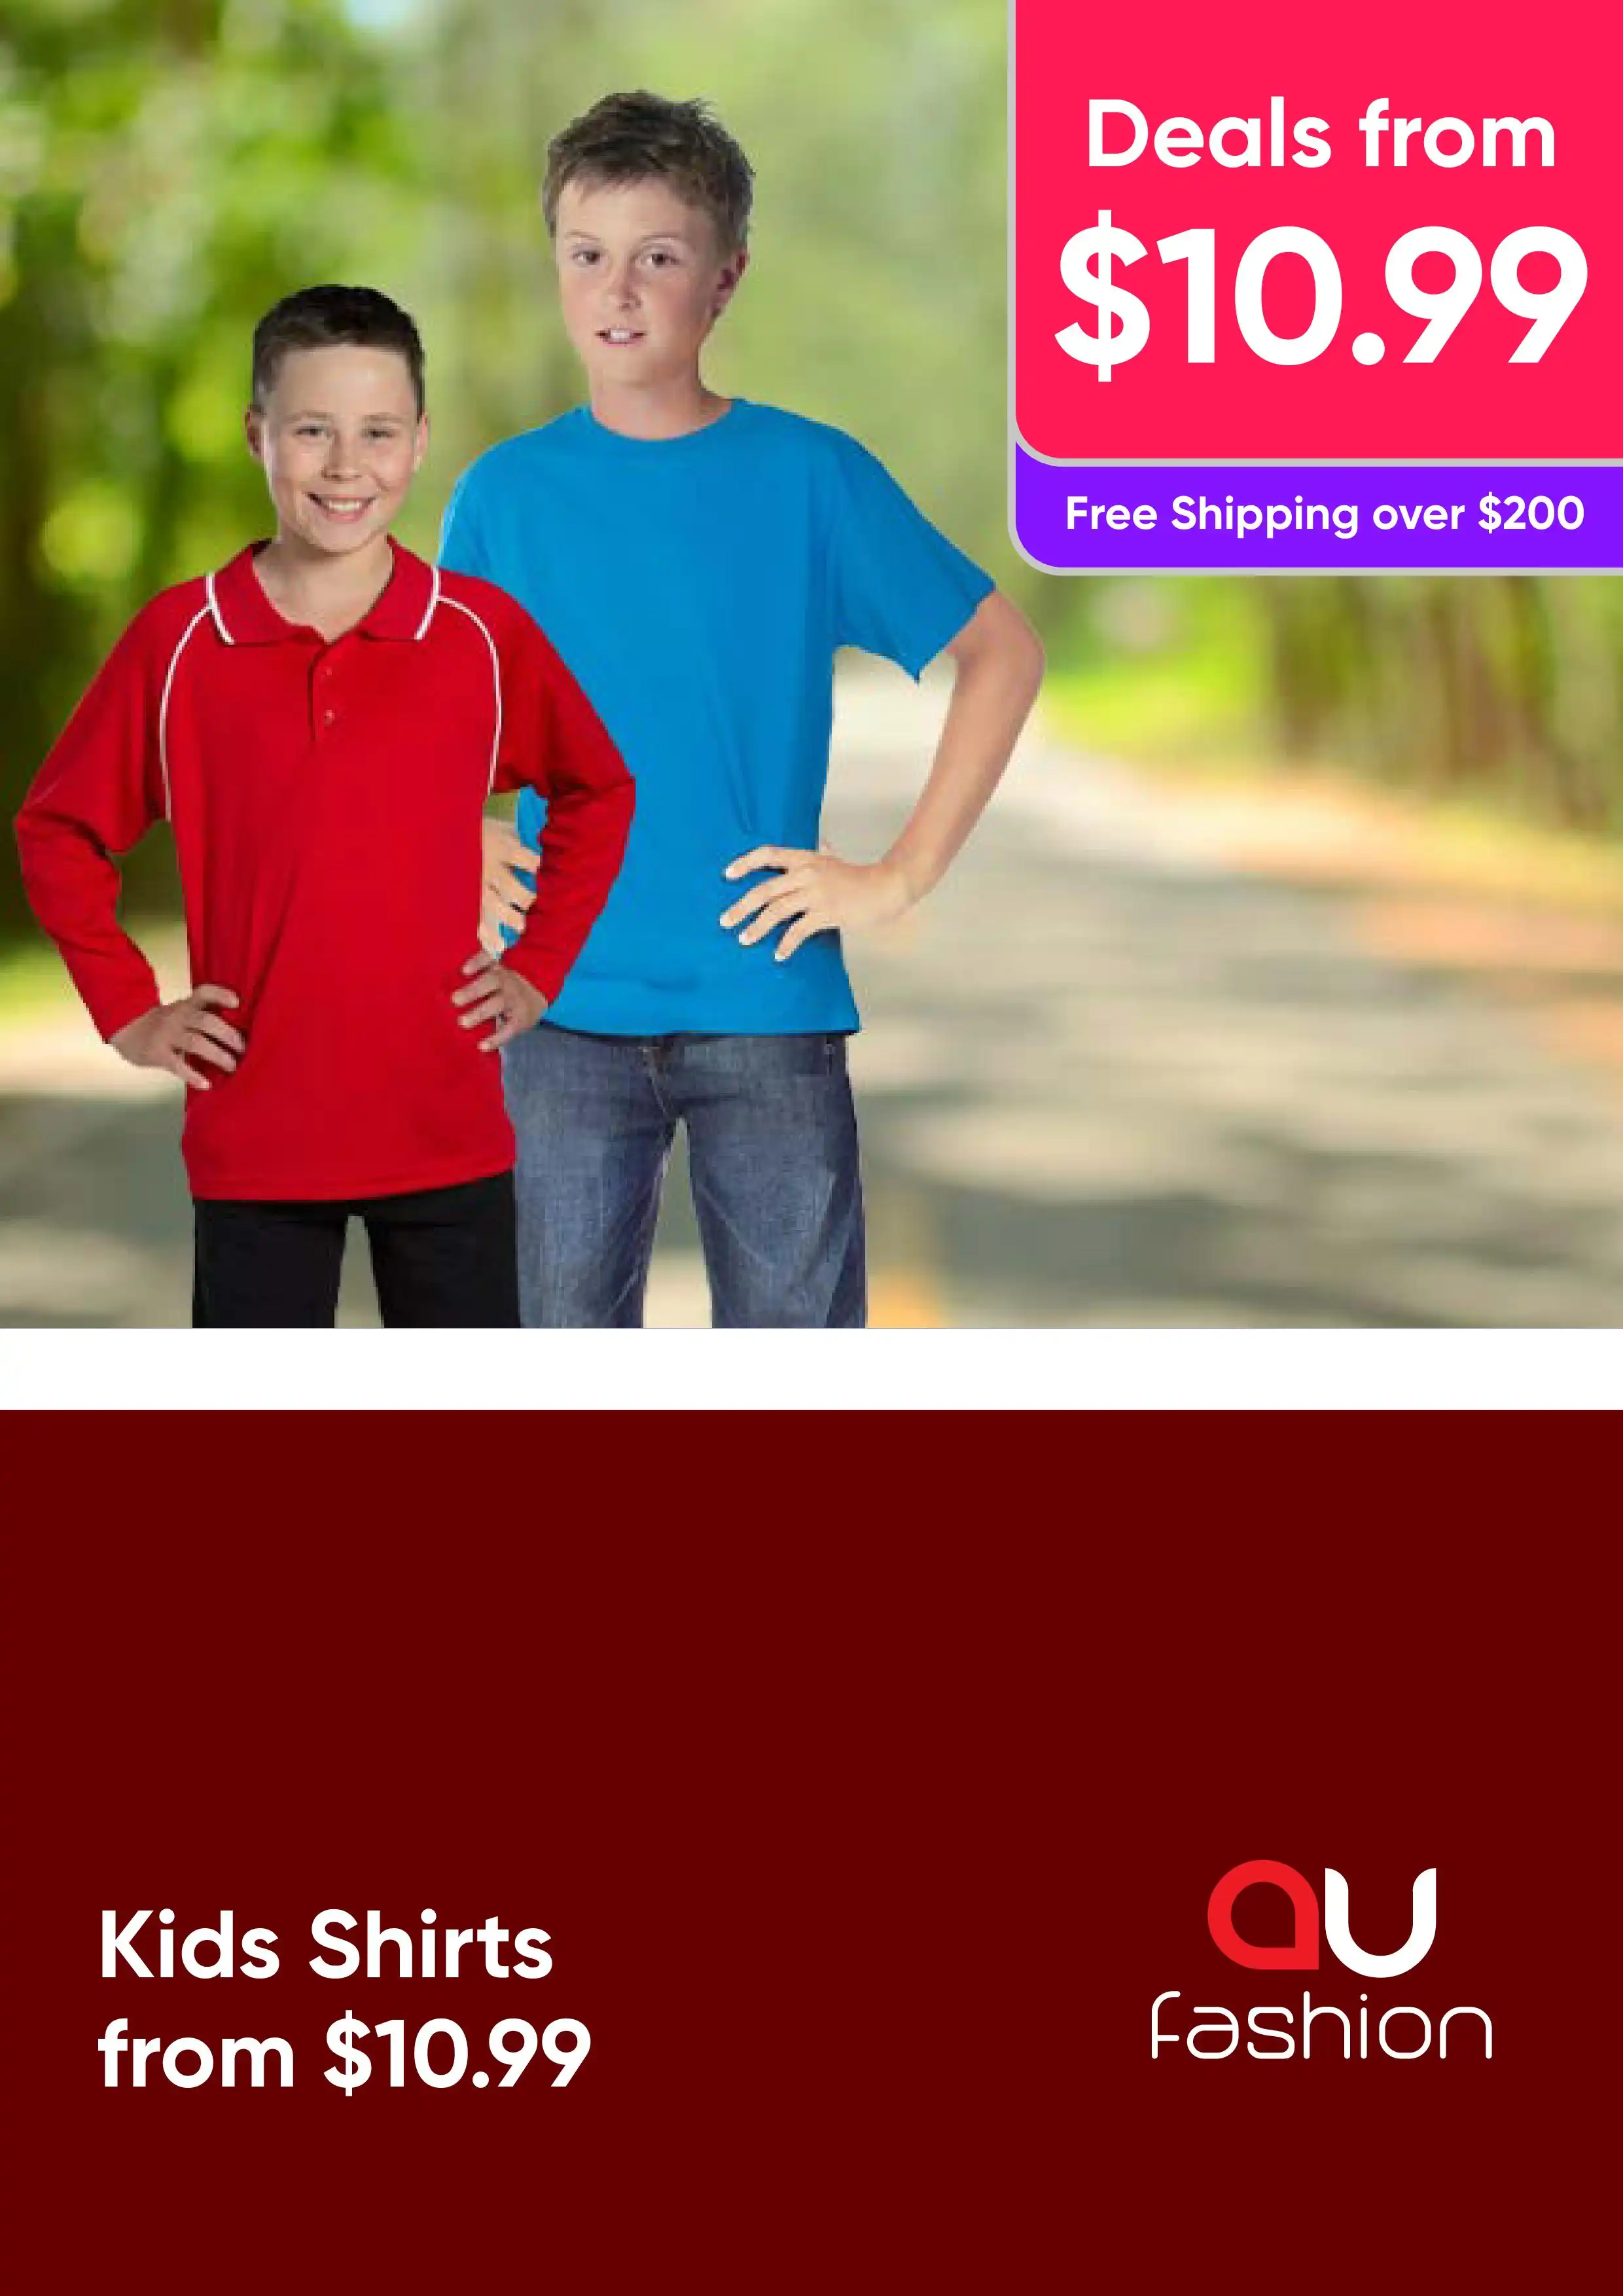 Kids Shirts from $10.99